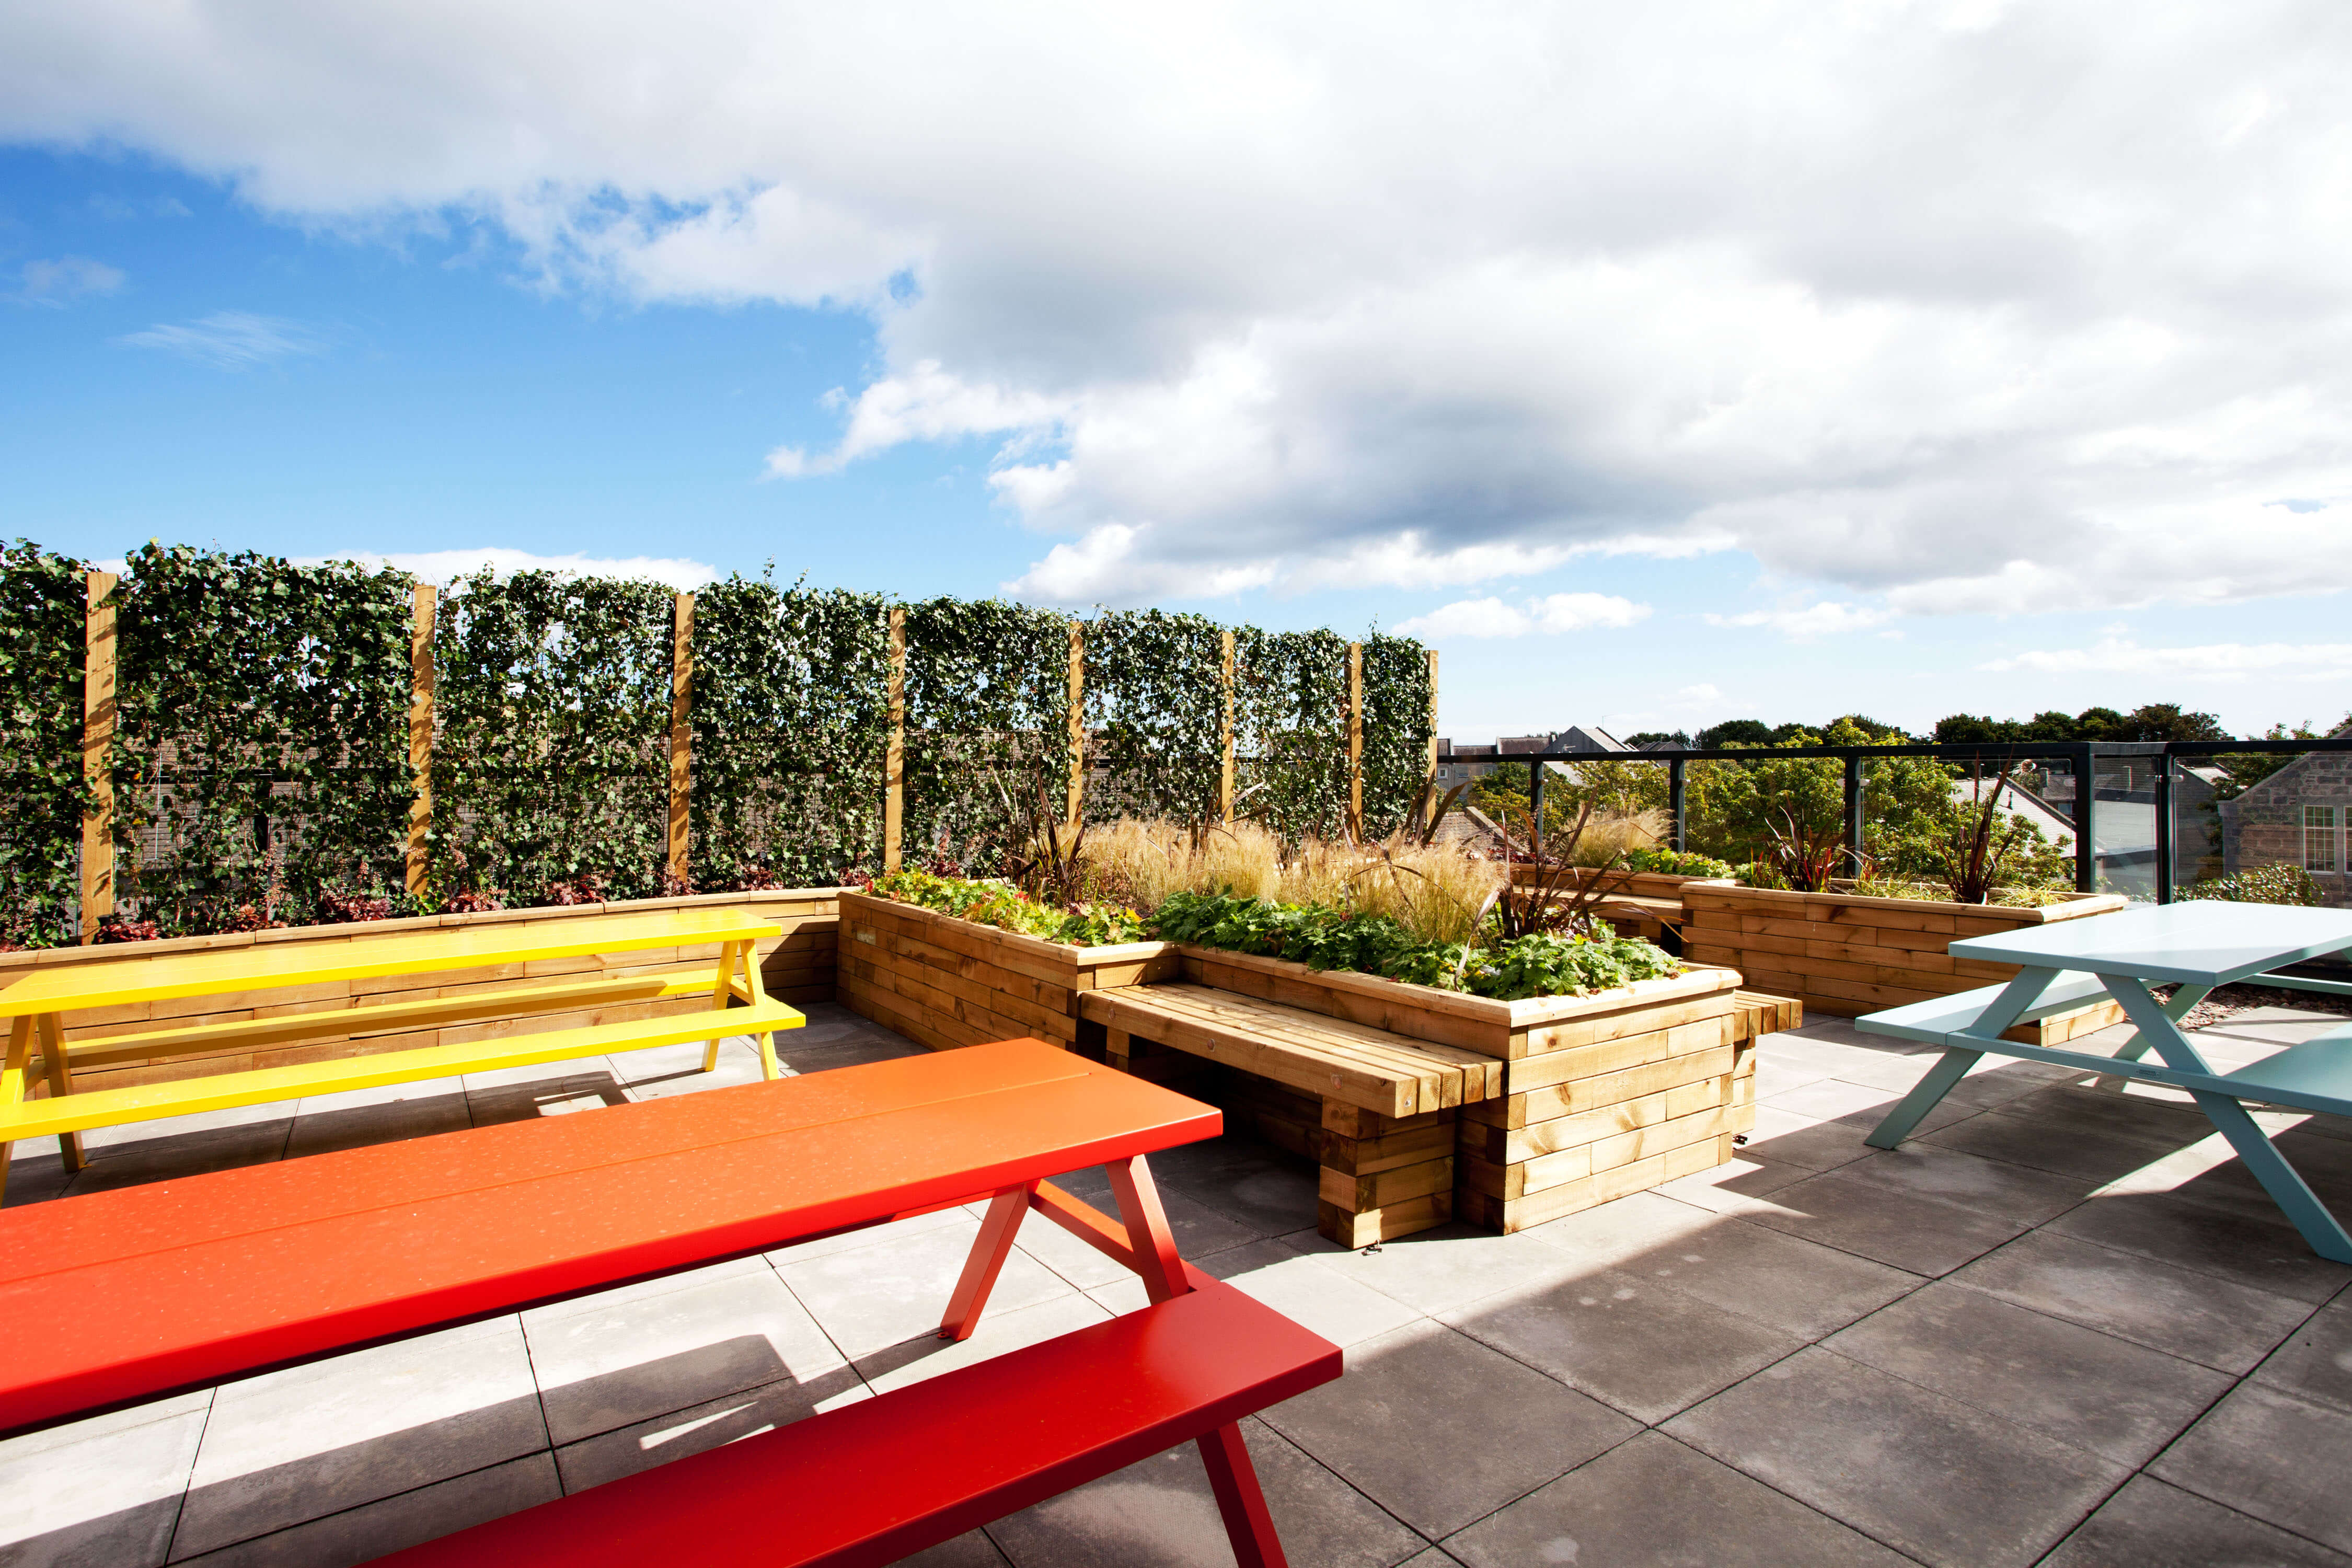 Roof terrace with benches